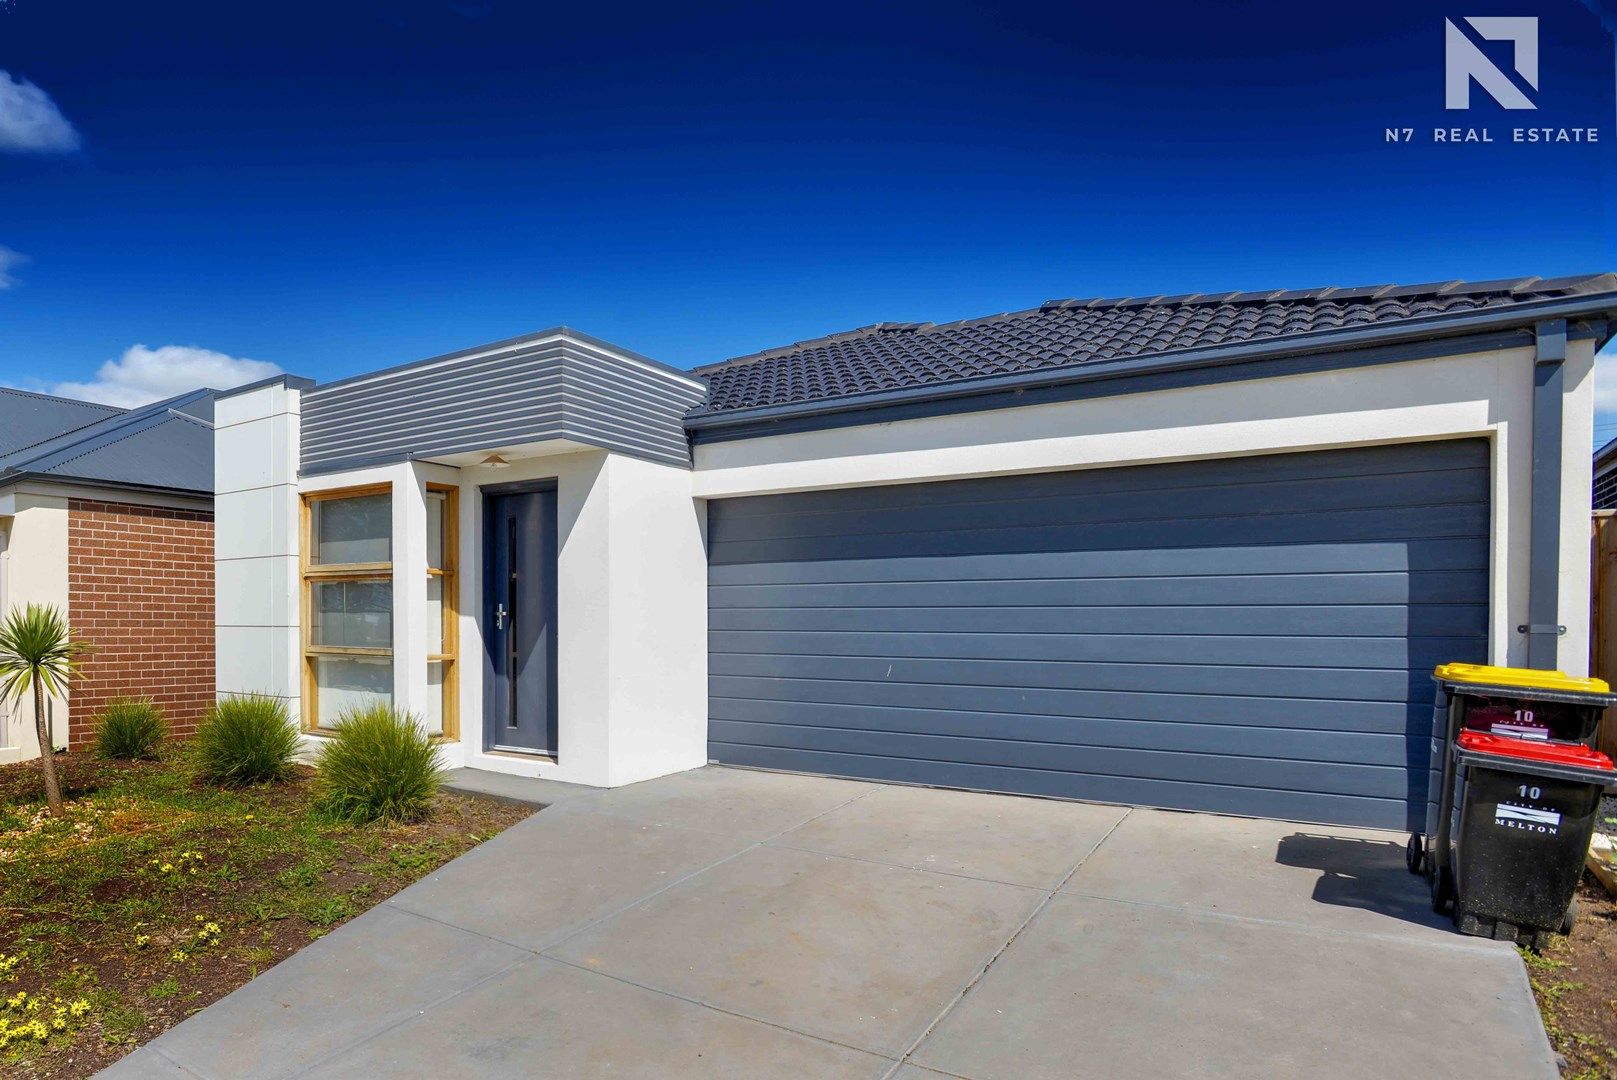 3 bedrooms House in 10 Goulding Drive FRASER RISE VIC, 3336